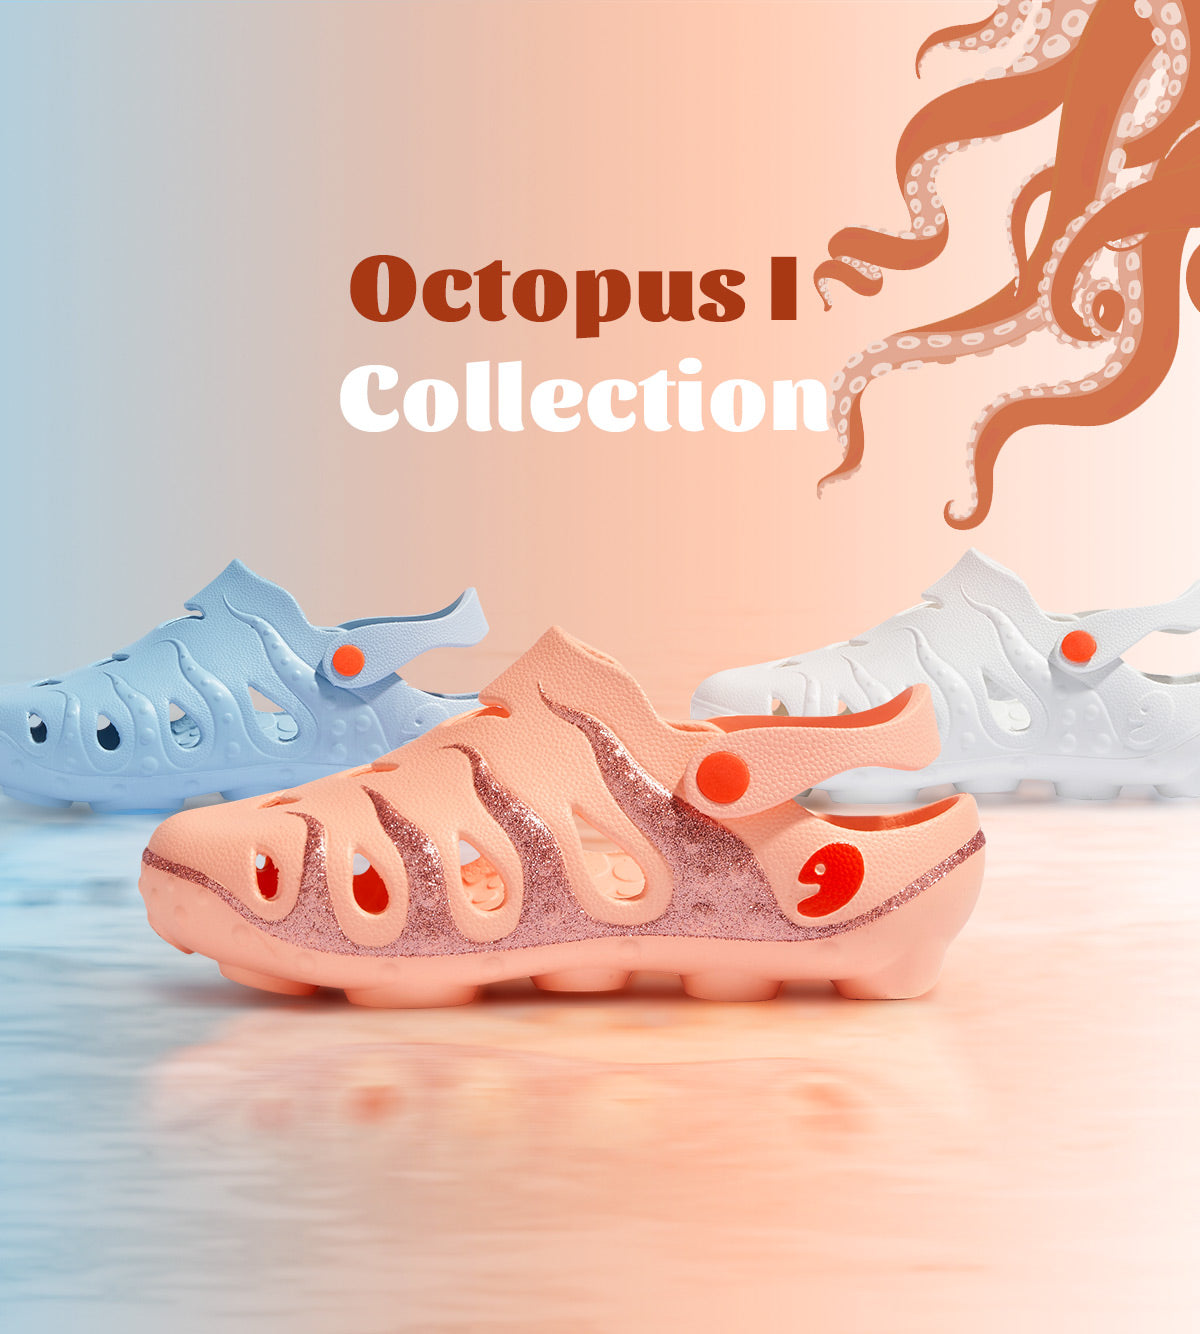 Octopus I Collection